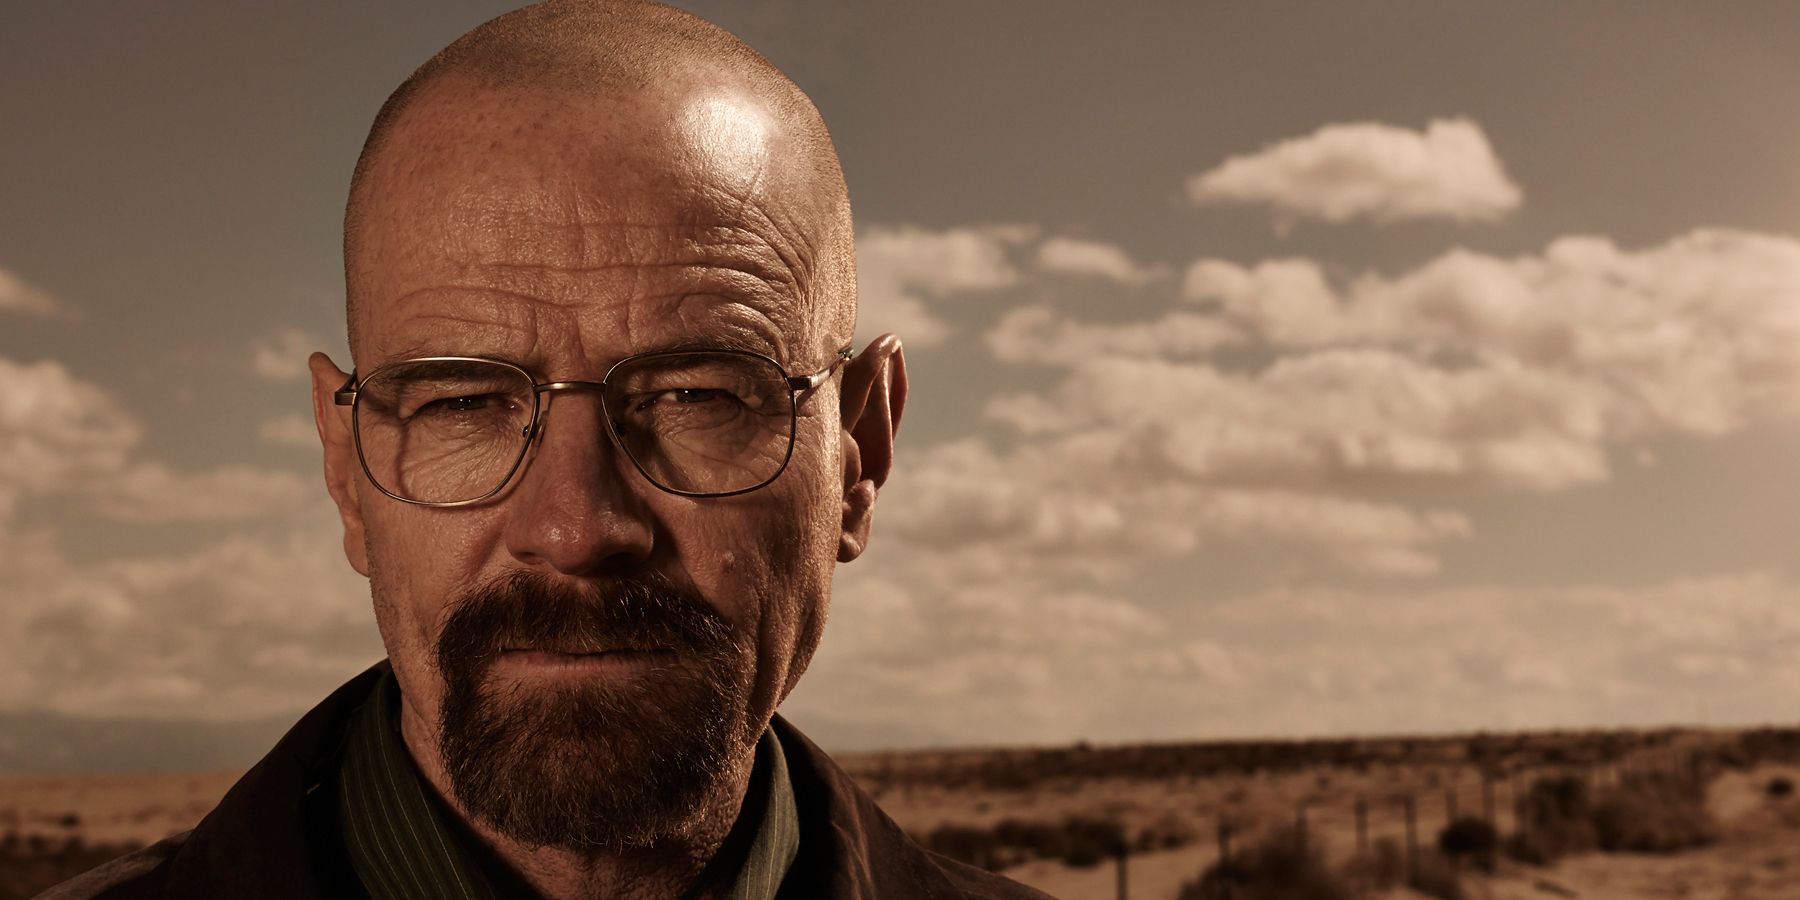 Walter White in promotional images for Breaking Bad